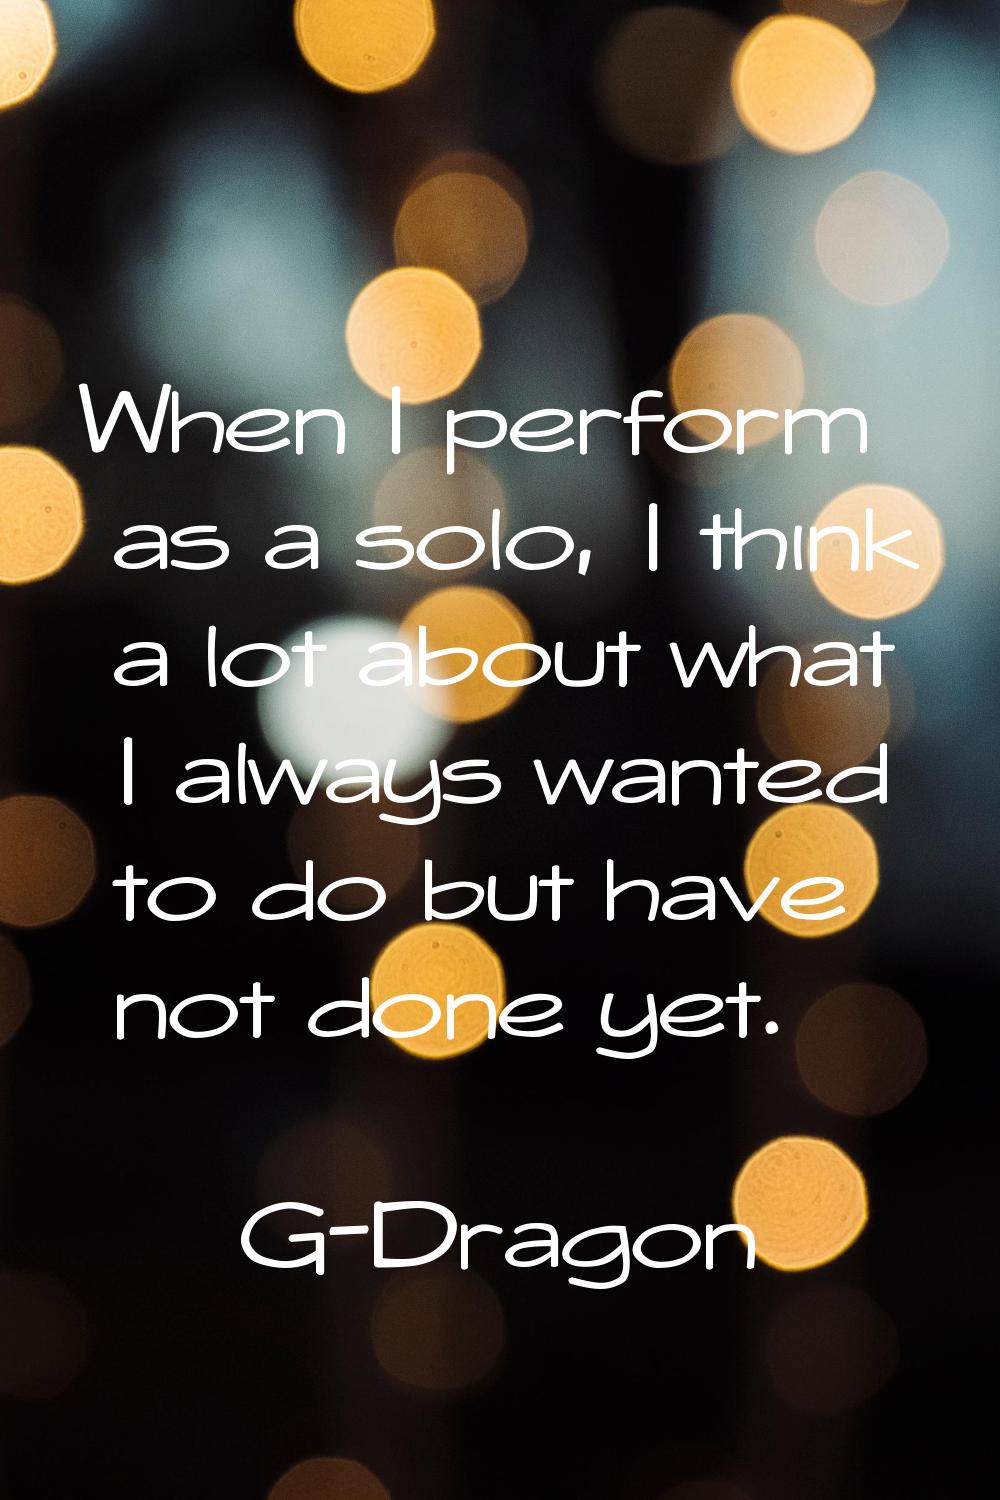 When I perform as a solo, I think a lot about what I always wanted to do but have not done yet.